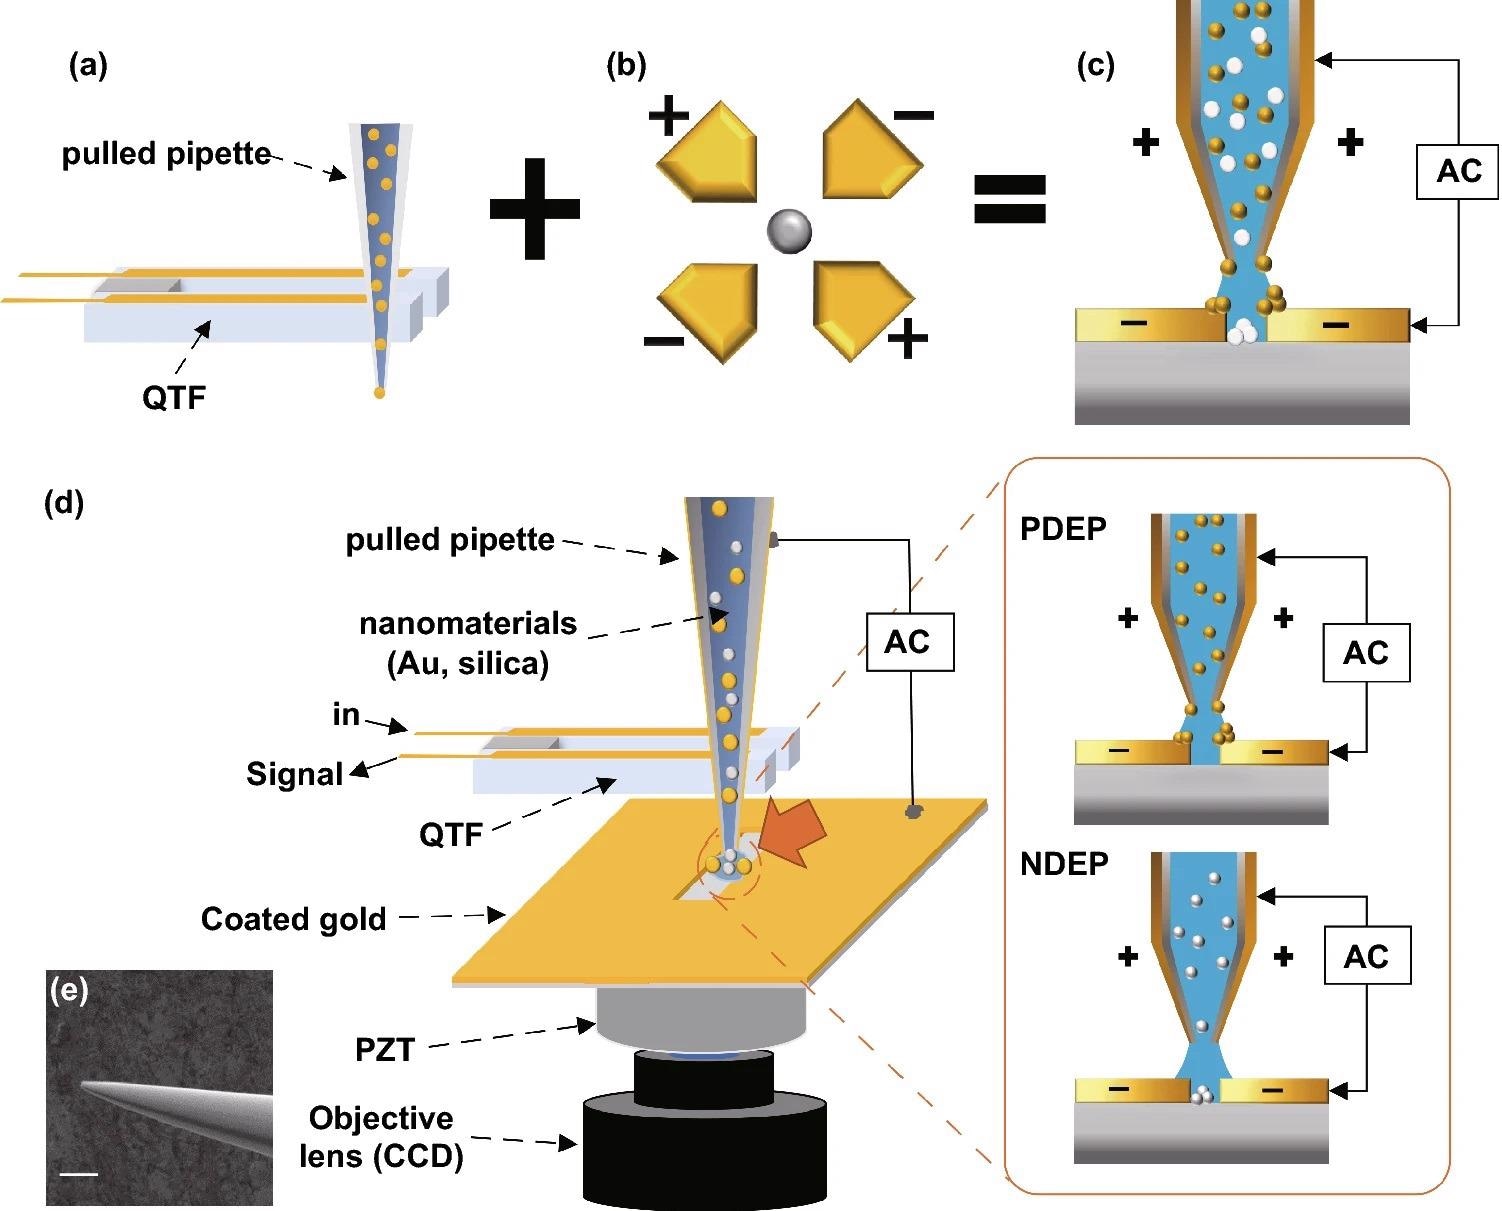 Schematic diagram of the experiment. (a) QTF-AFM with a pulled pipette system. It has strength in efficient low-volume liquid delivery. (b) Quadrupole DEP trap. If the Clausius–Mossotti factor is below zero, solutes receive a negative-DEP force and go to the center of the electrodes. (c)We propose the DEP-based material-selective deposition technique using the pipette-AFM system. The pipette-AFM delivers the low-volume solution to the desired position and DEP forces deposited nanoparticles on the edge or middle position of electrodes. Yellow particles show the positive-DEP effect and white particles show the negative-DEP effect. (d) Detailed schematic diagram of the experimental setup. XY positioning of the pipette on the scratched gap is enacted while watching the optical microscope image of CCD in real-time, and the Z positioning (approach and retract) of the pipette is enacted under QTF-AFM feedback. An AC voltage is applied between the coated Au layer on the glass substrate and the surfaces of the Au-coated pulled pipette. (e) Detailed SEM image of the coated pulled pipette, 10 µm scale bar.